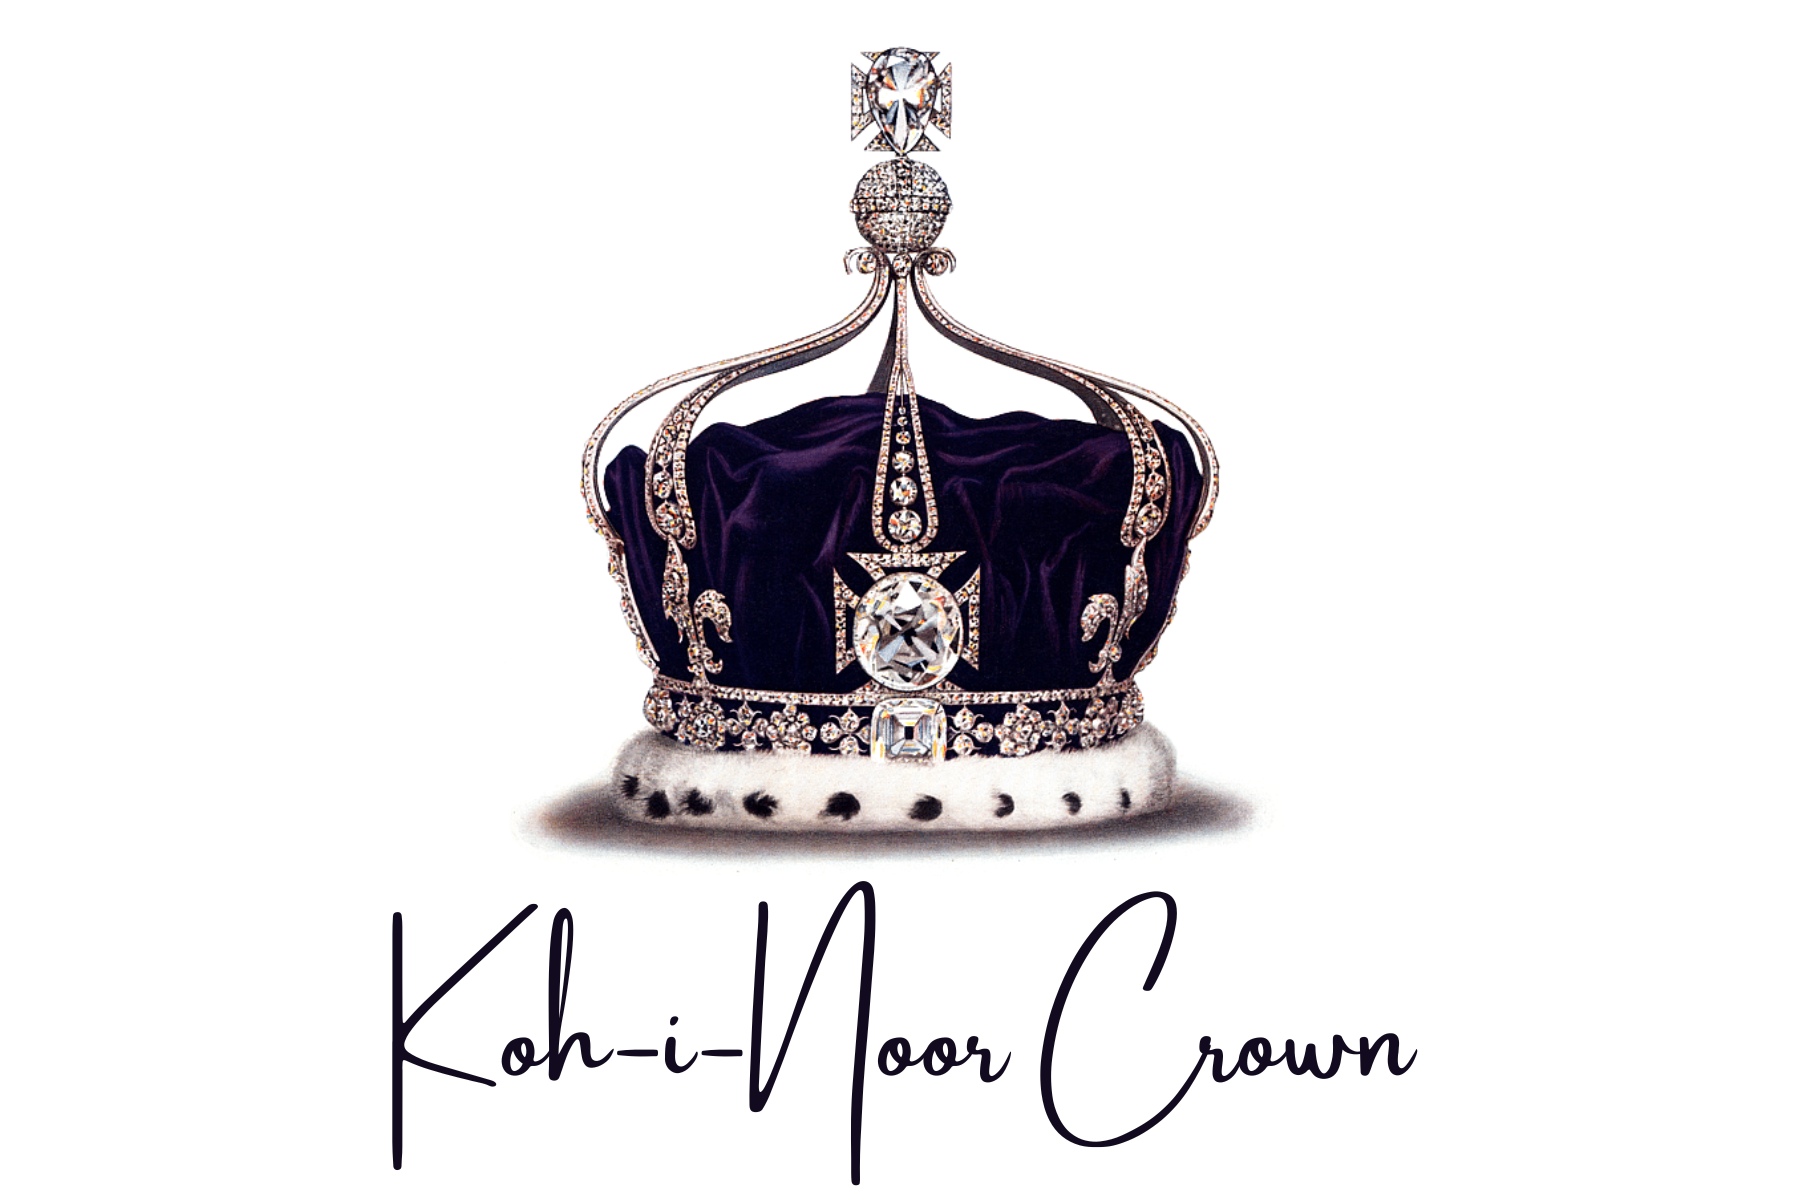 A tower-shaped Koh-i-Noor crown encrusted with diamonds that is 105.6 carats (21.12 g)